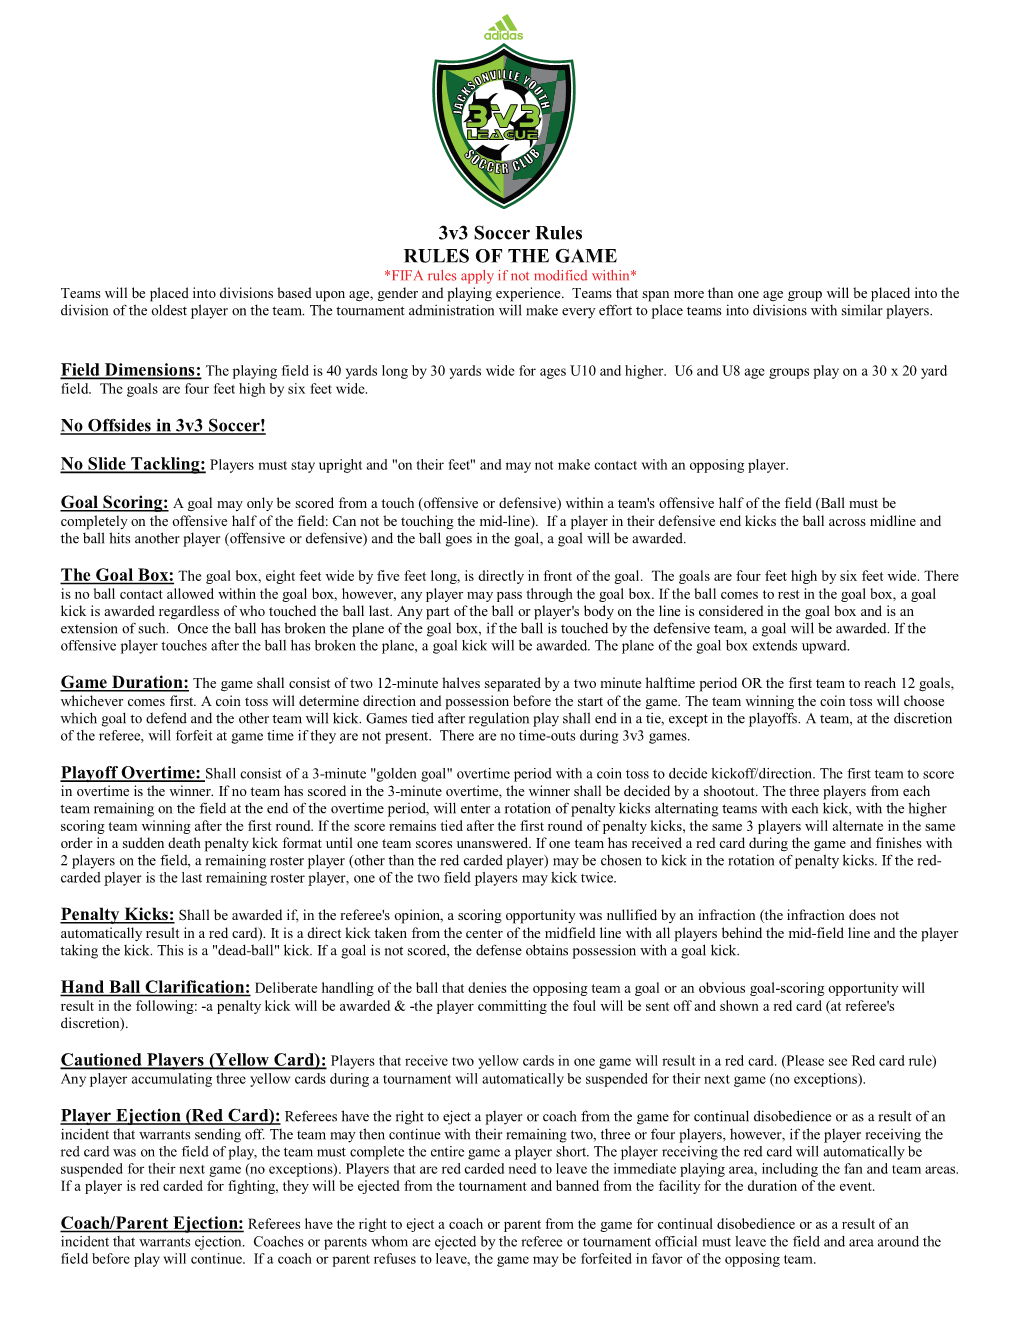 3V3 Soccer Rules RULES of the GAME *FIFA Rules Apply If Not Modified Within* Teams Will Be Placed Into Divisions Based Upon Age, Gender and Playing Experience